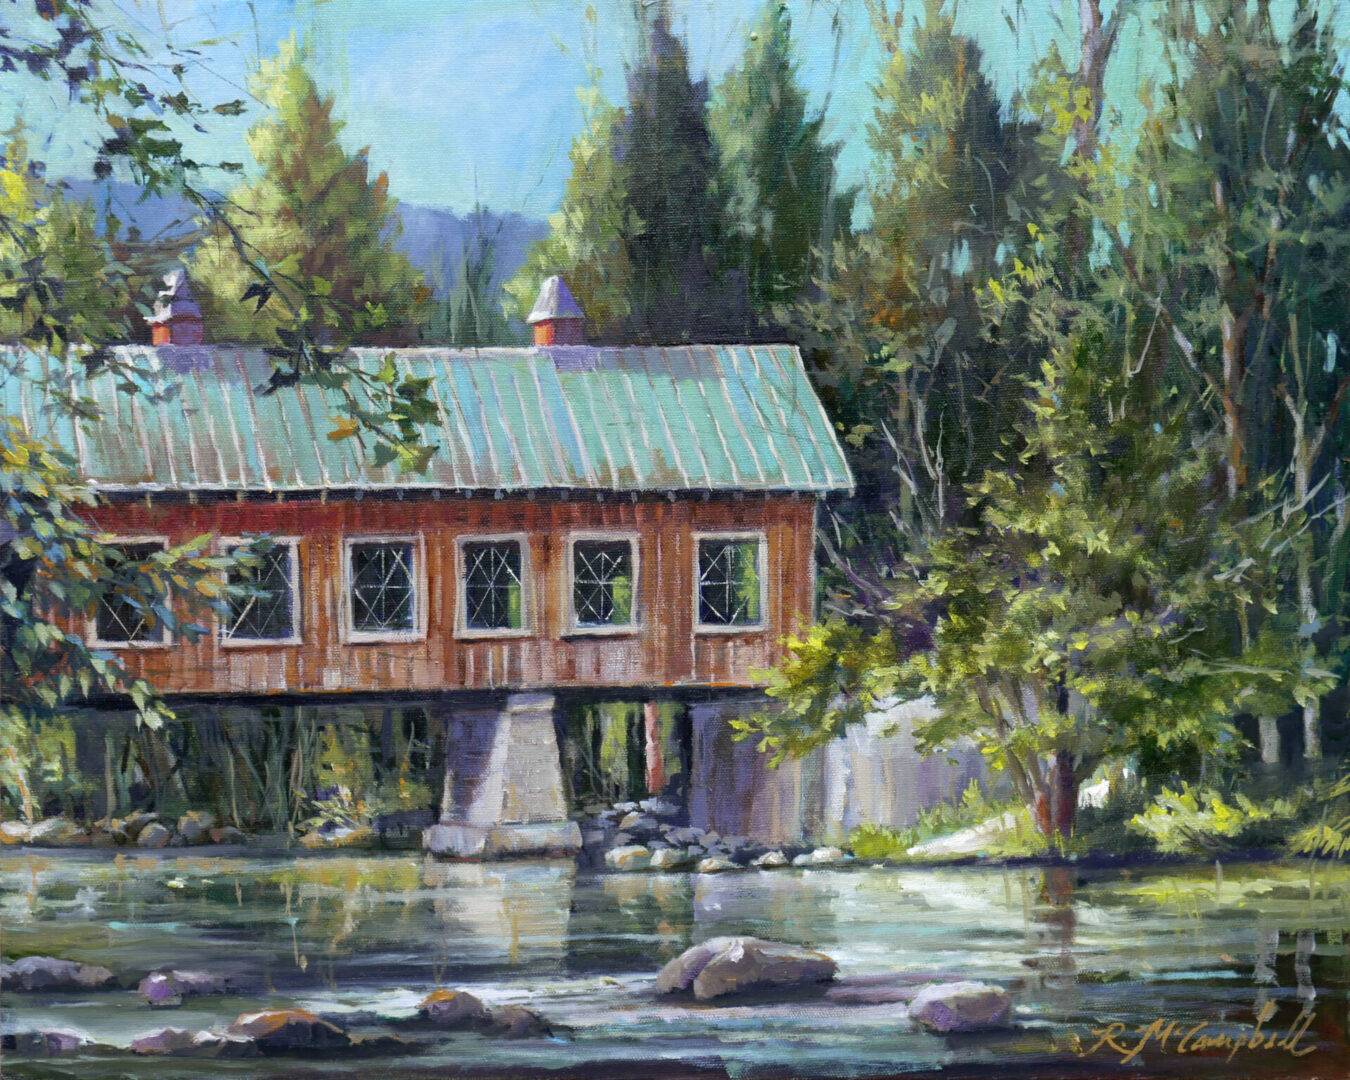 A covered bridge painting